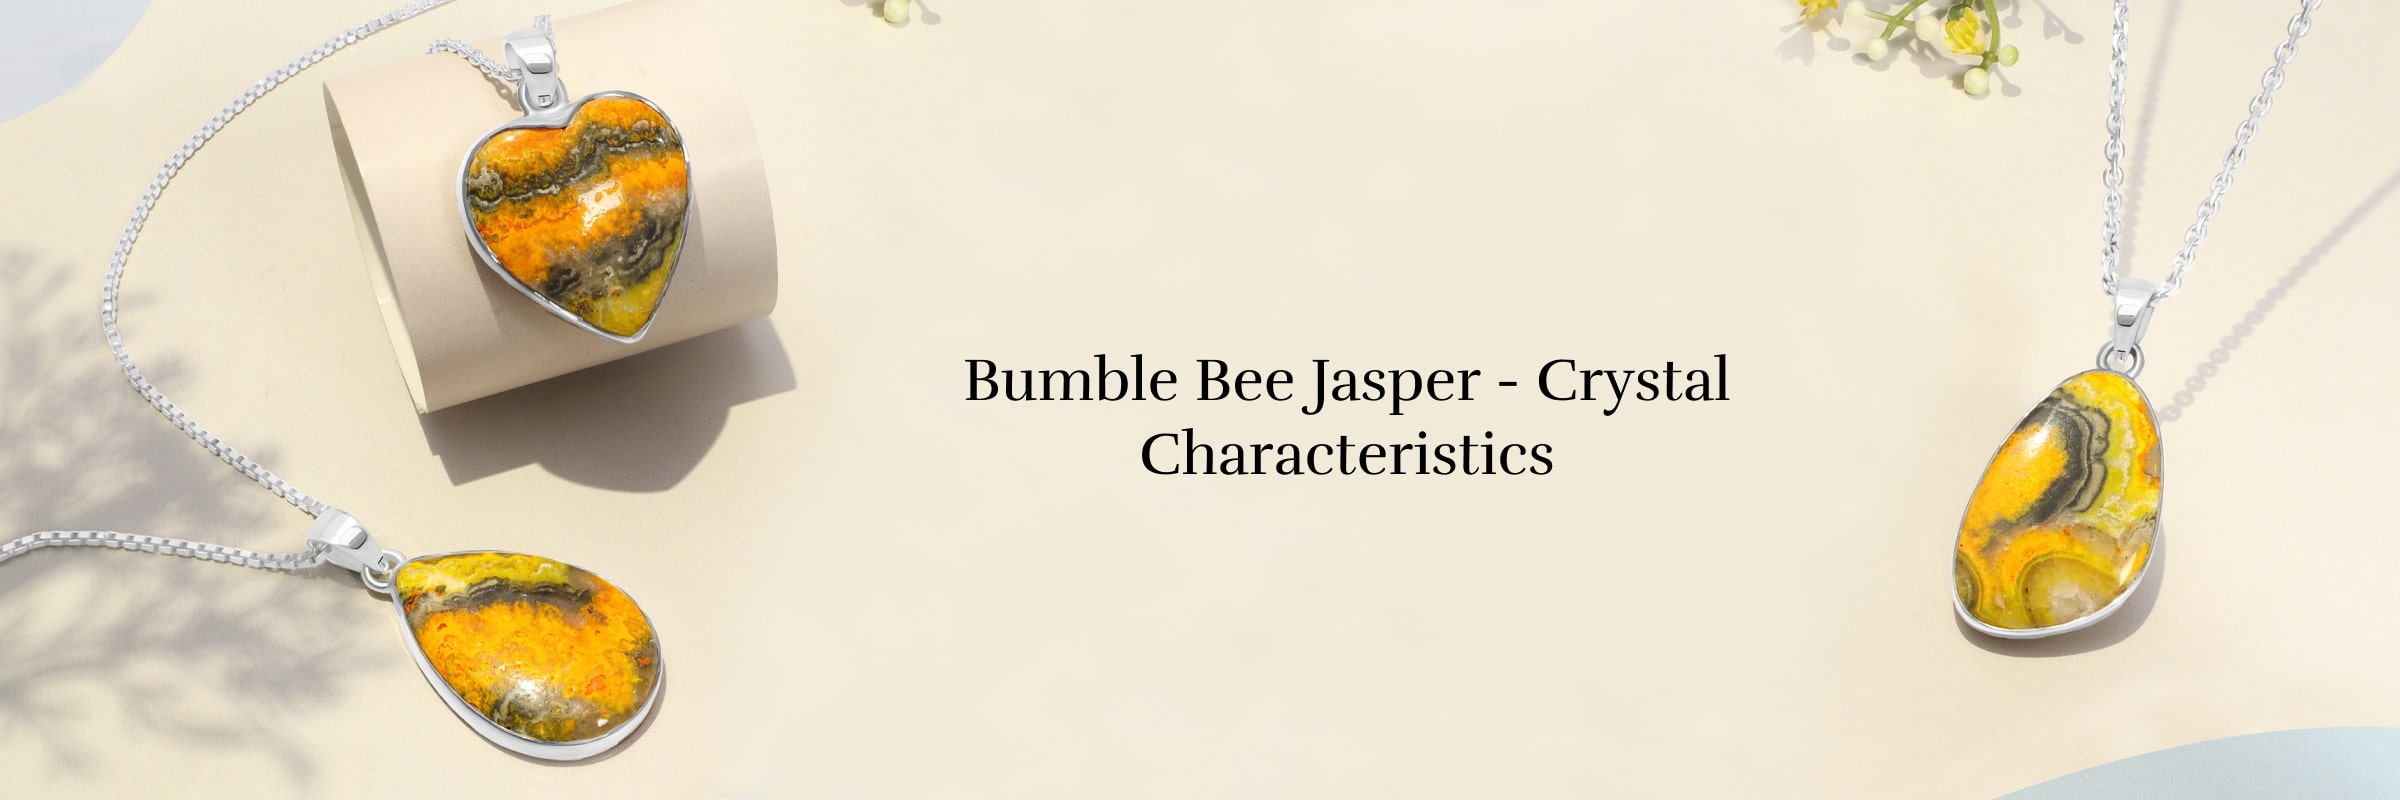 Physical Properties of Bumble Bee Jasper Crystal